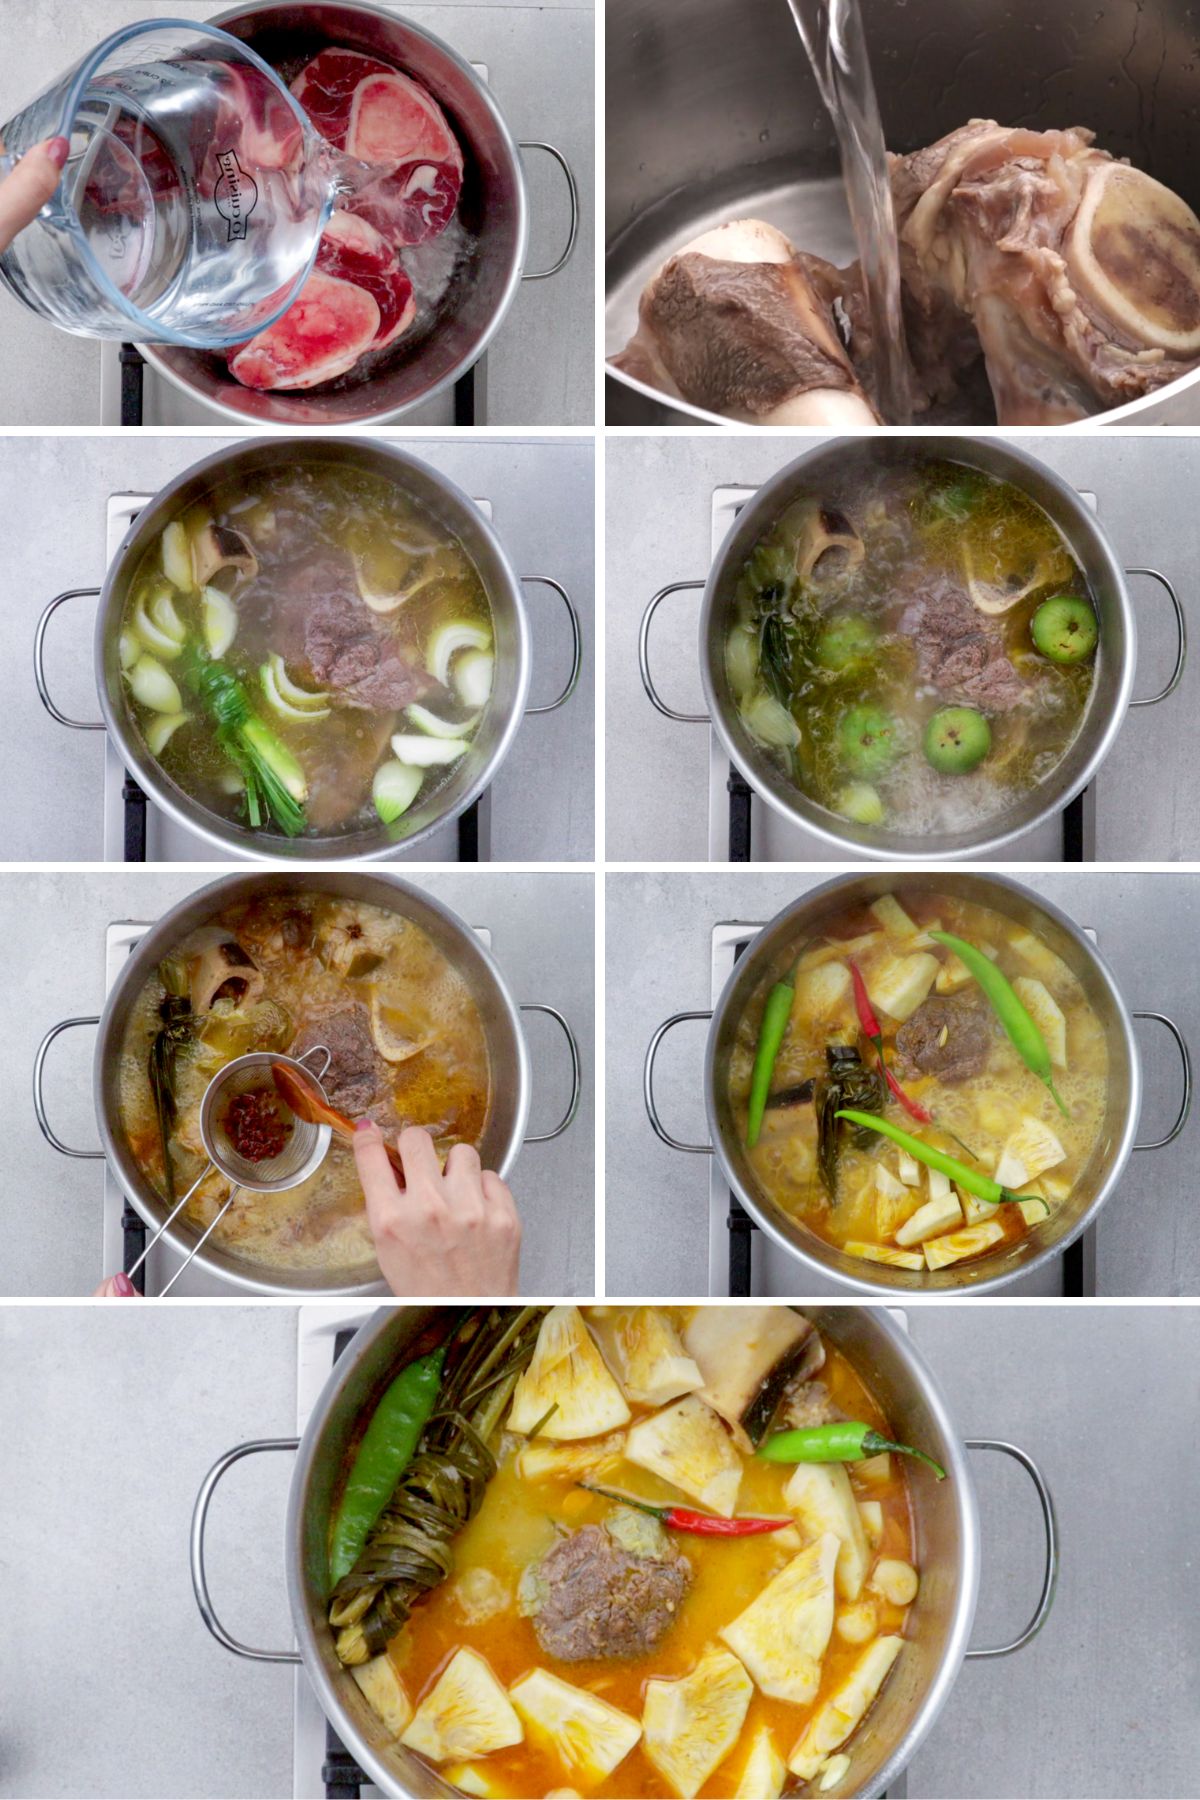 Steps on how to cook cansi.